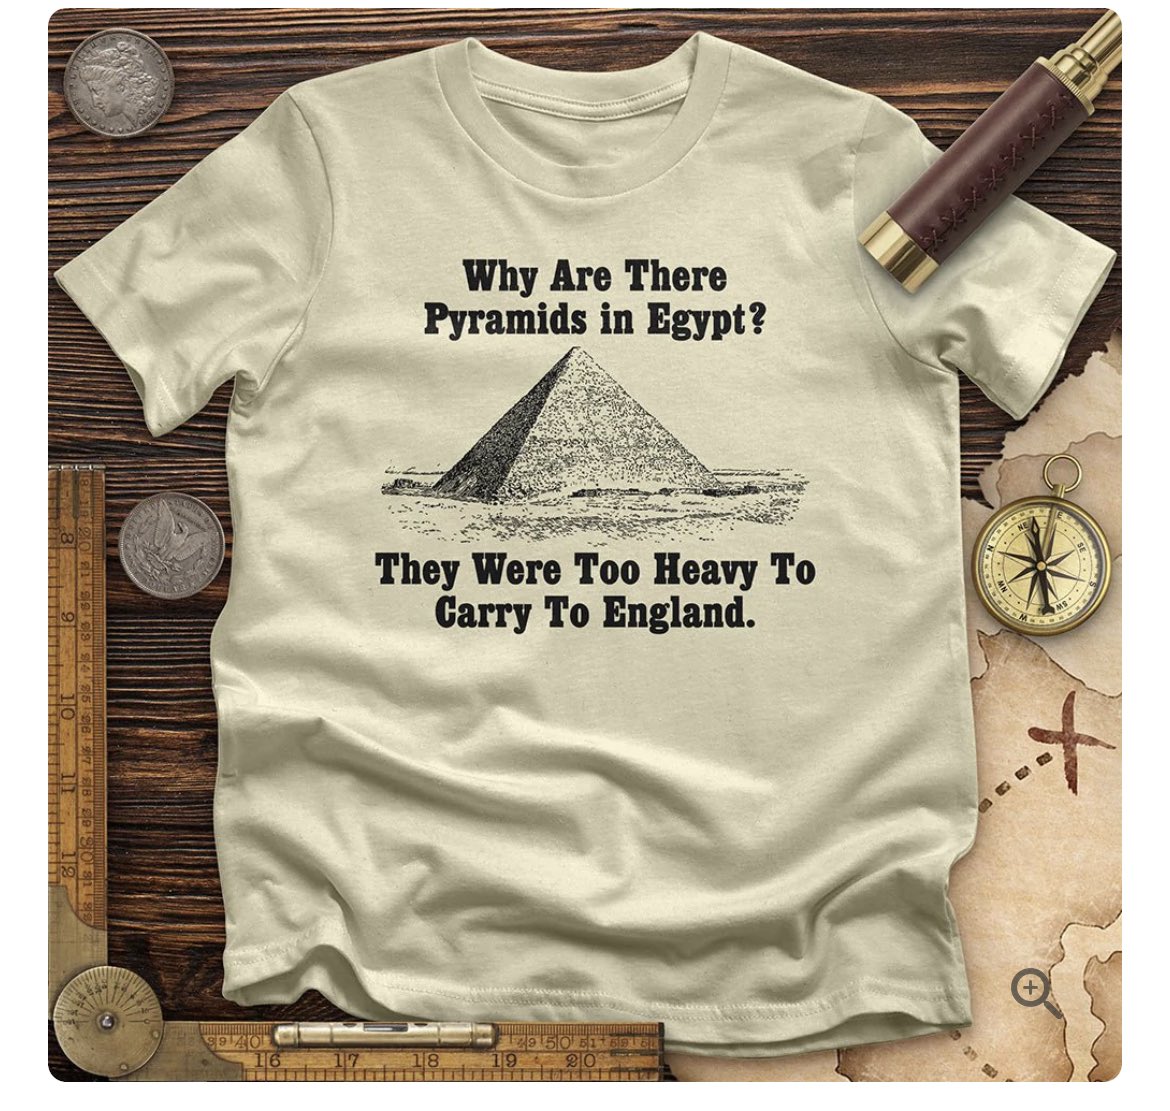 I might need this shirt. #twitterstorians